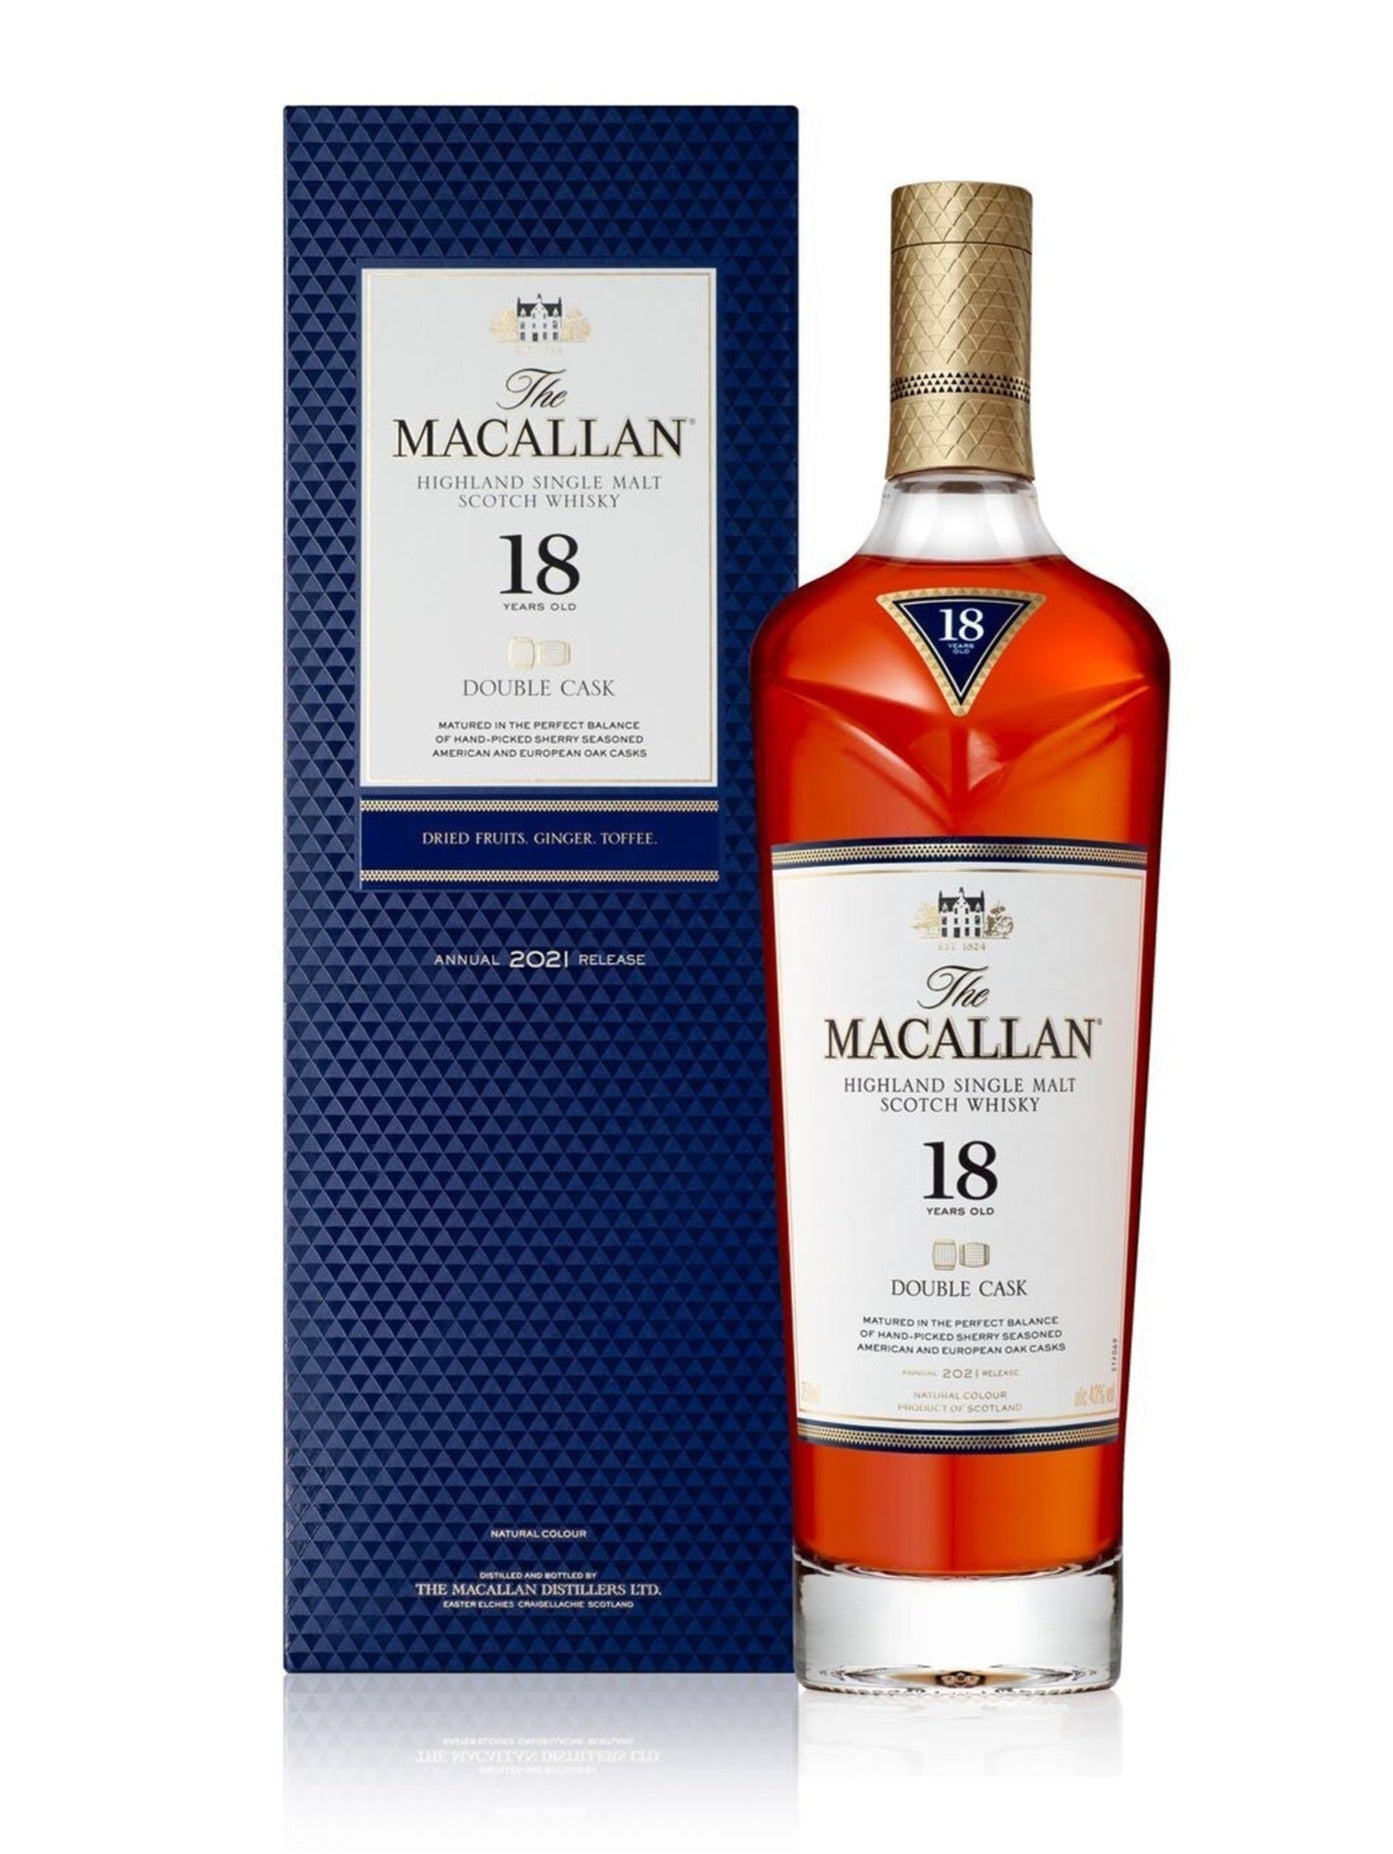 The Macallan 18 Years-Highland Single Malt Scotch Whisky Double Cask Media 1 of 1